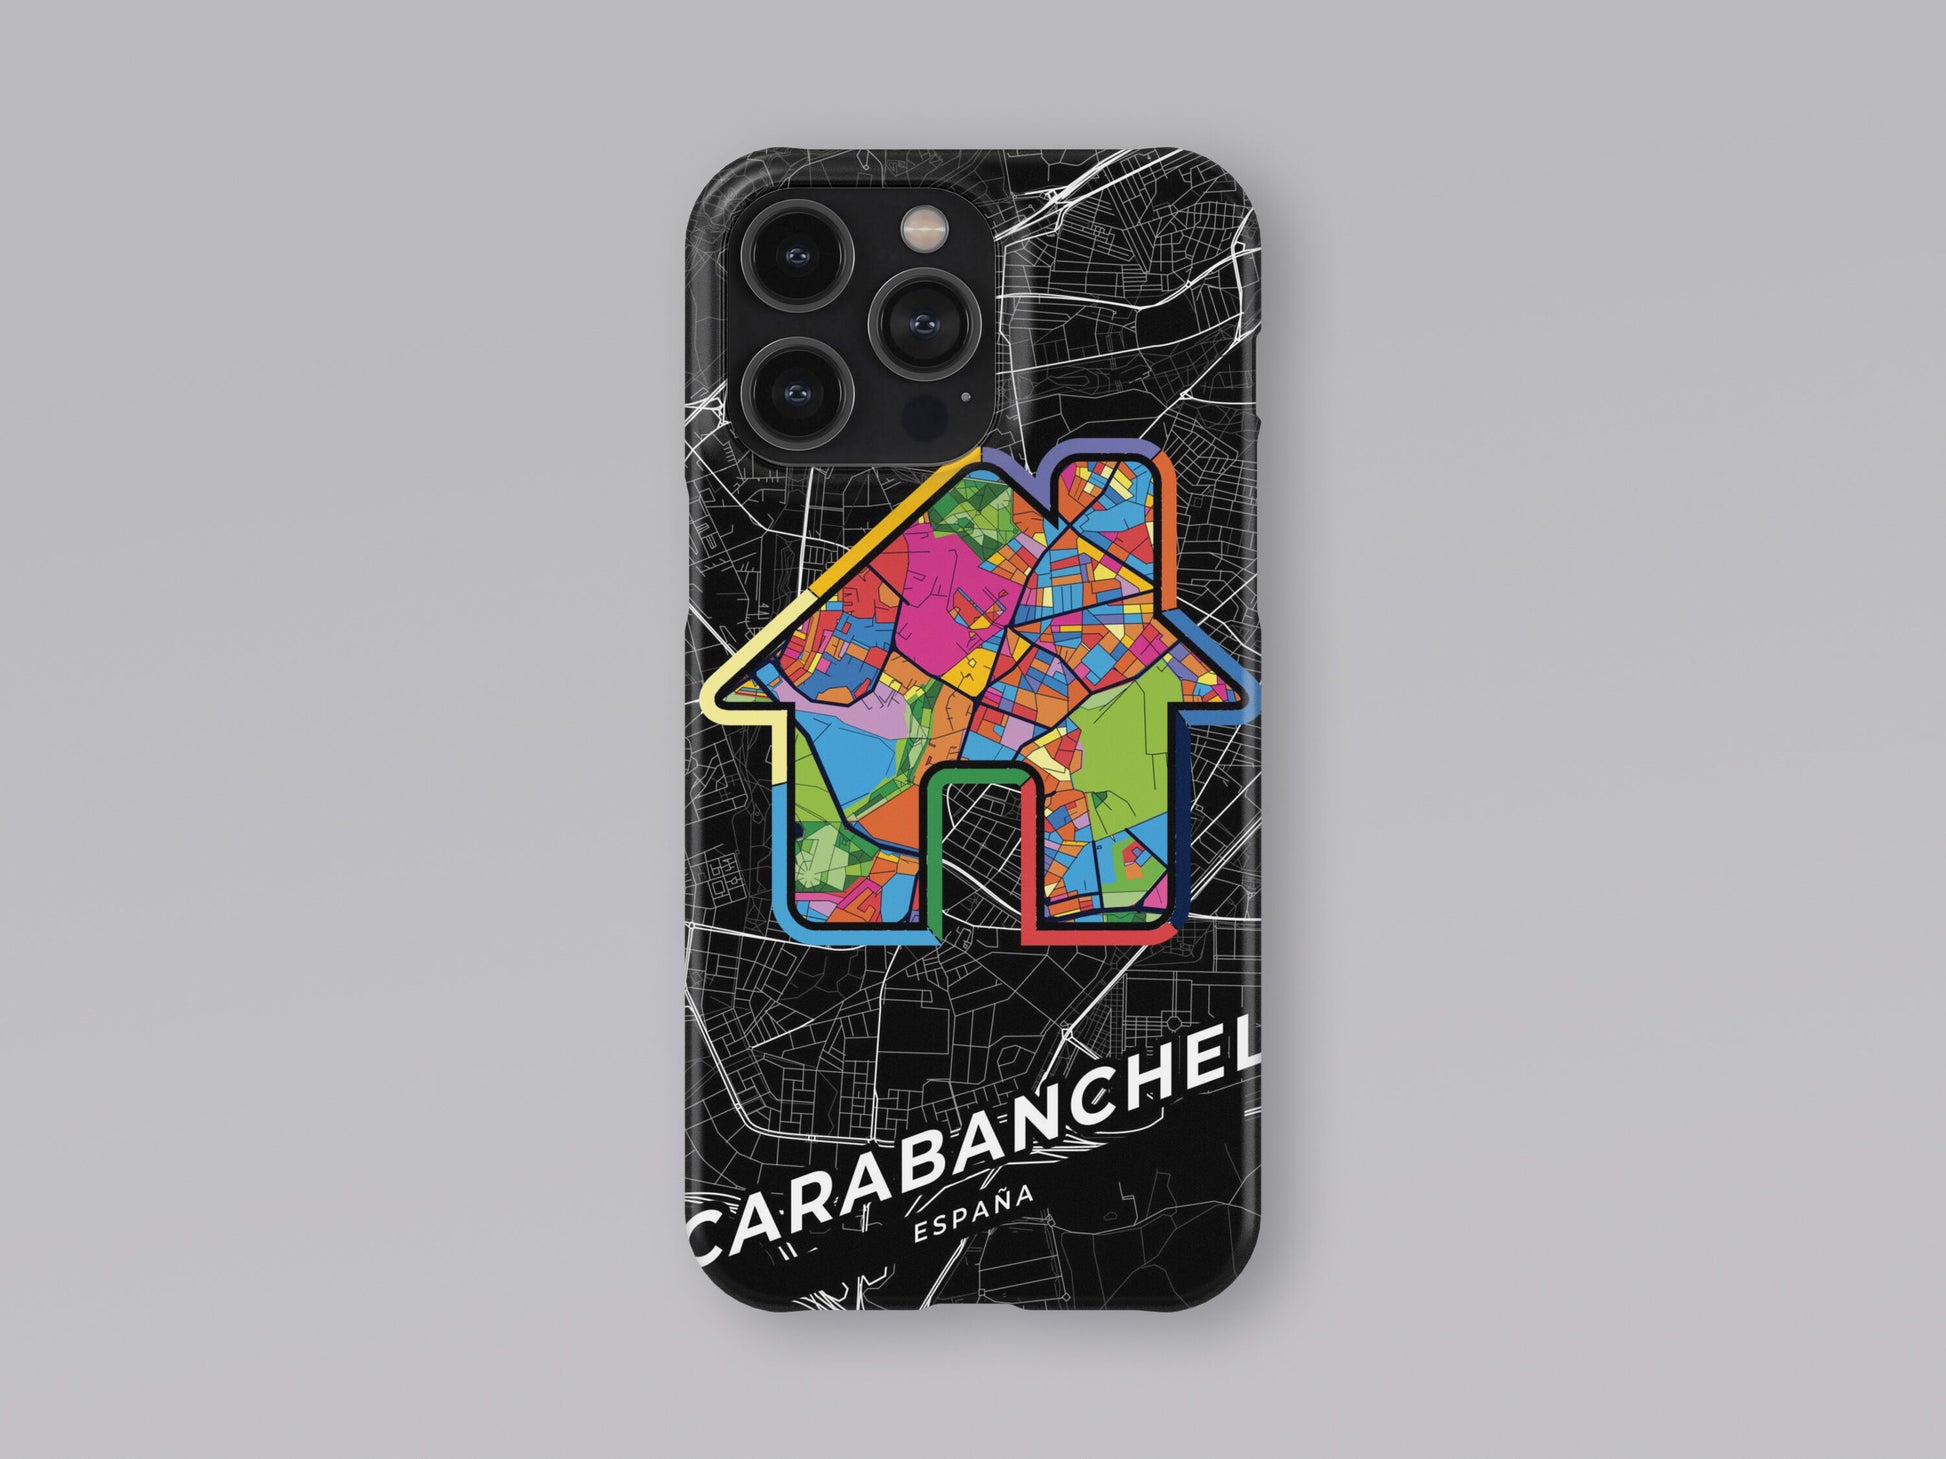 Carabanchel Spain slim phone case with colorful icon. Birthday, wedding or housewarming gift. Couple match cases. 3